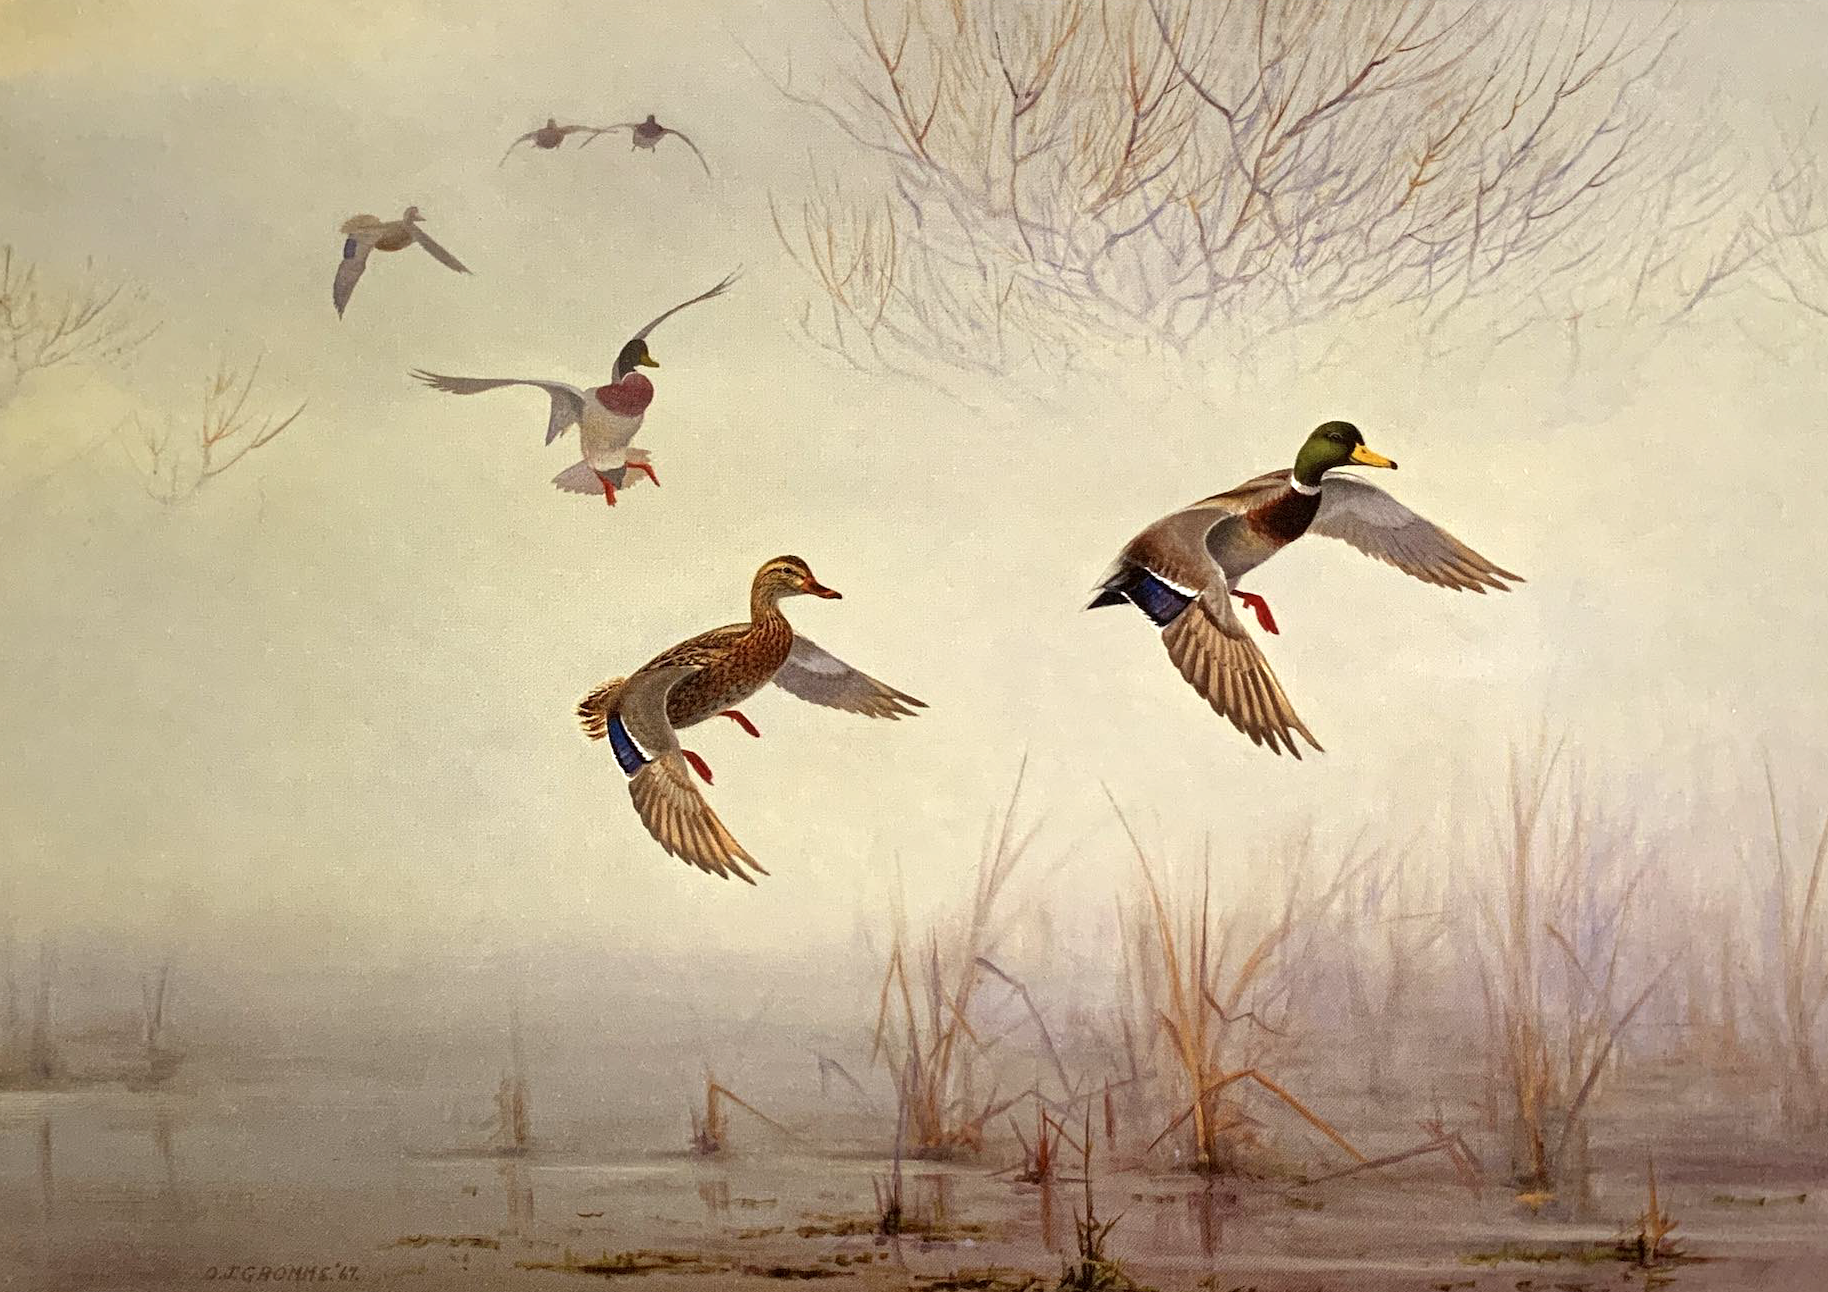 The Dust Bowl - Founding of Ducks Unlimited Canada — Ducks